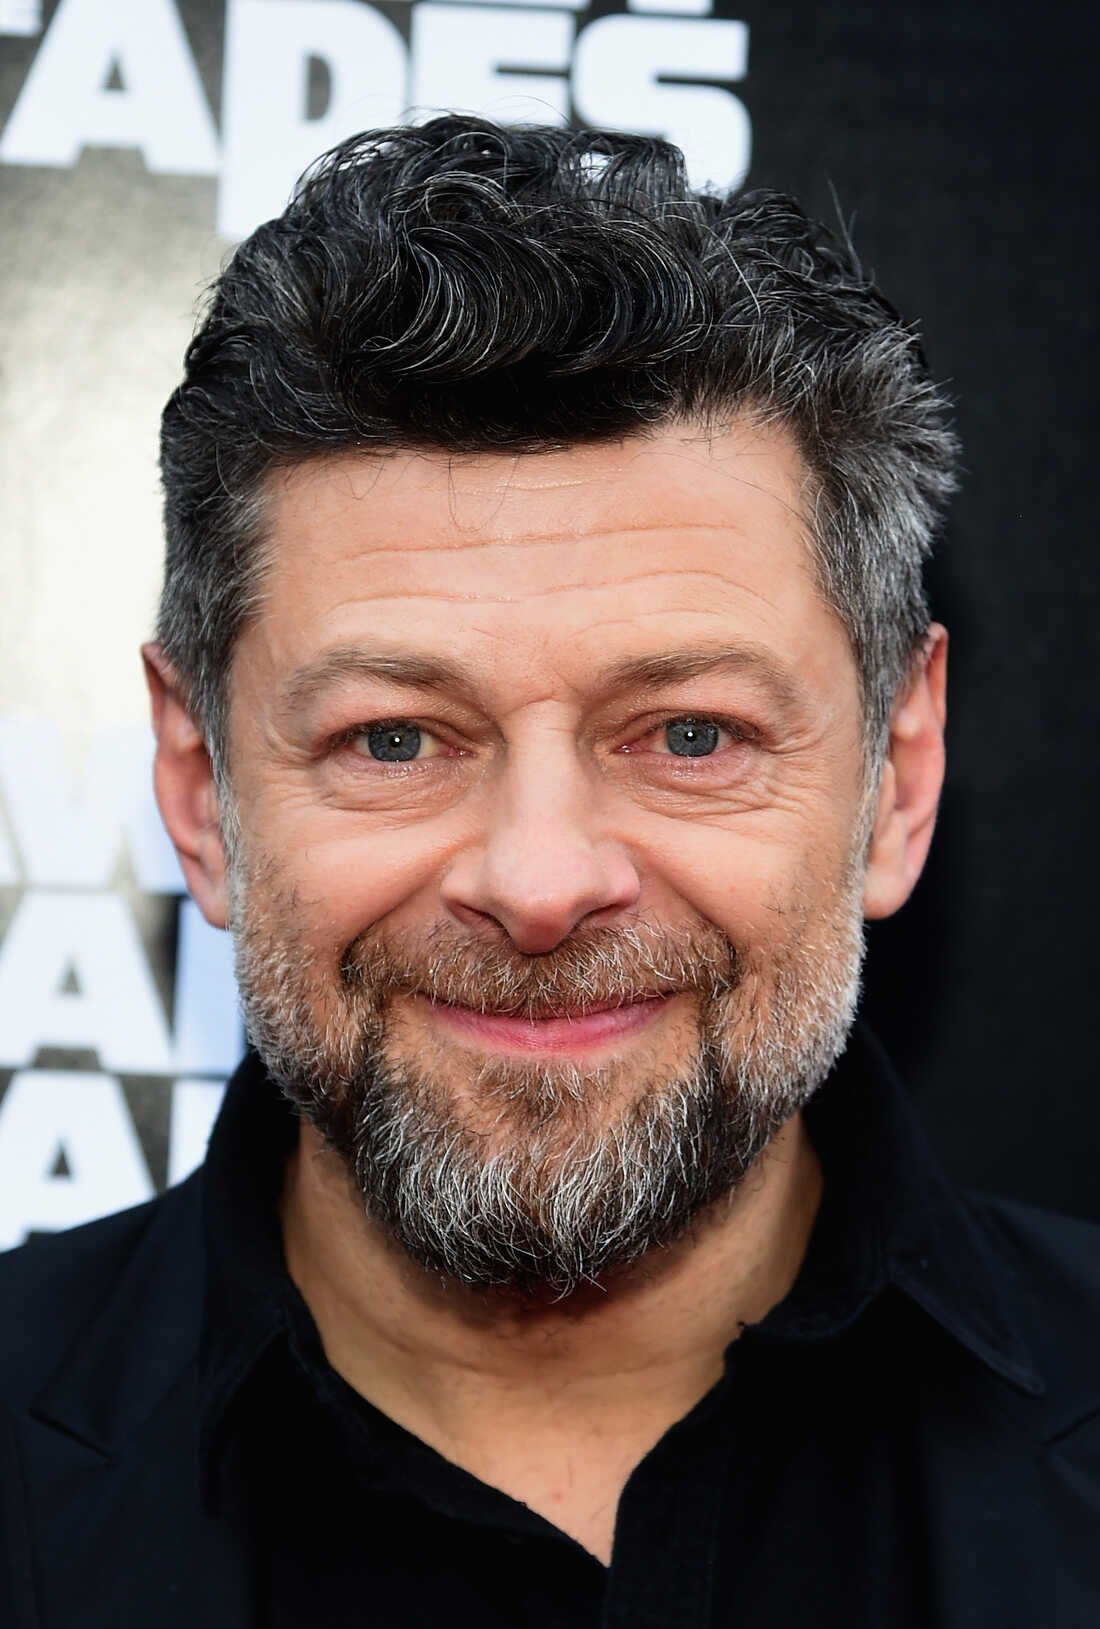 Andy Serkis explains why 'The Hobbit' is a family movie